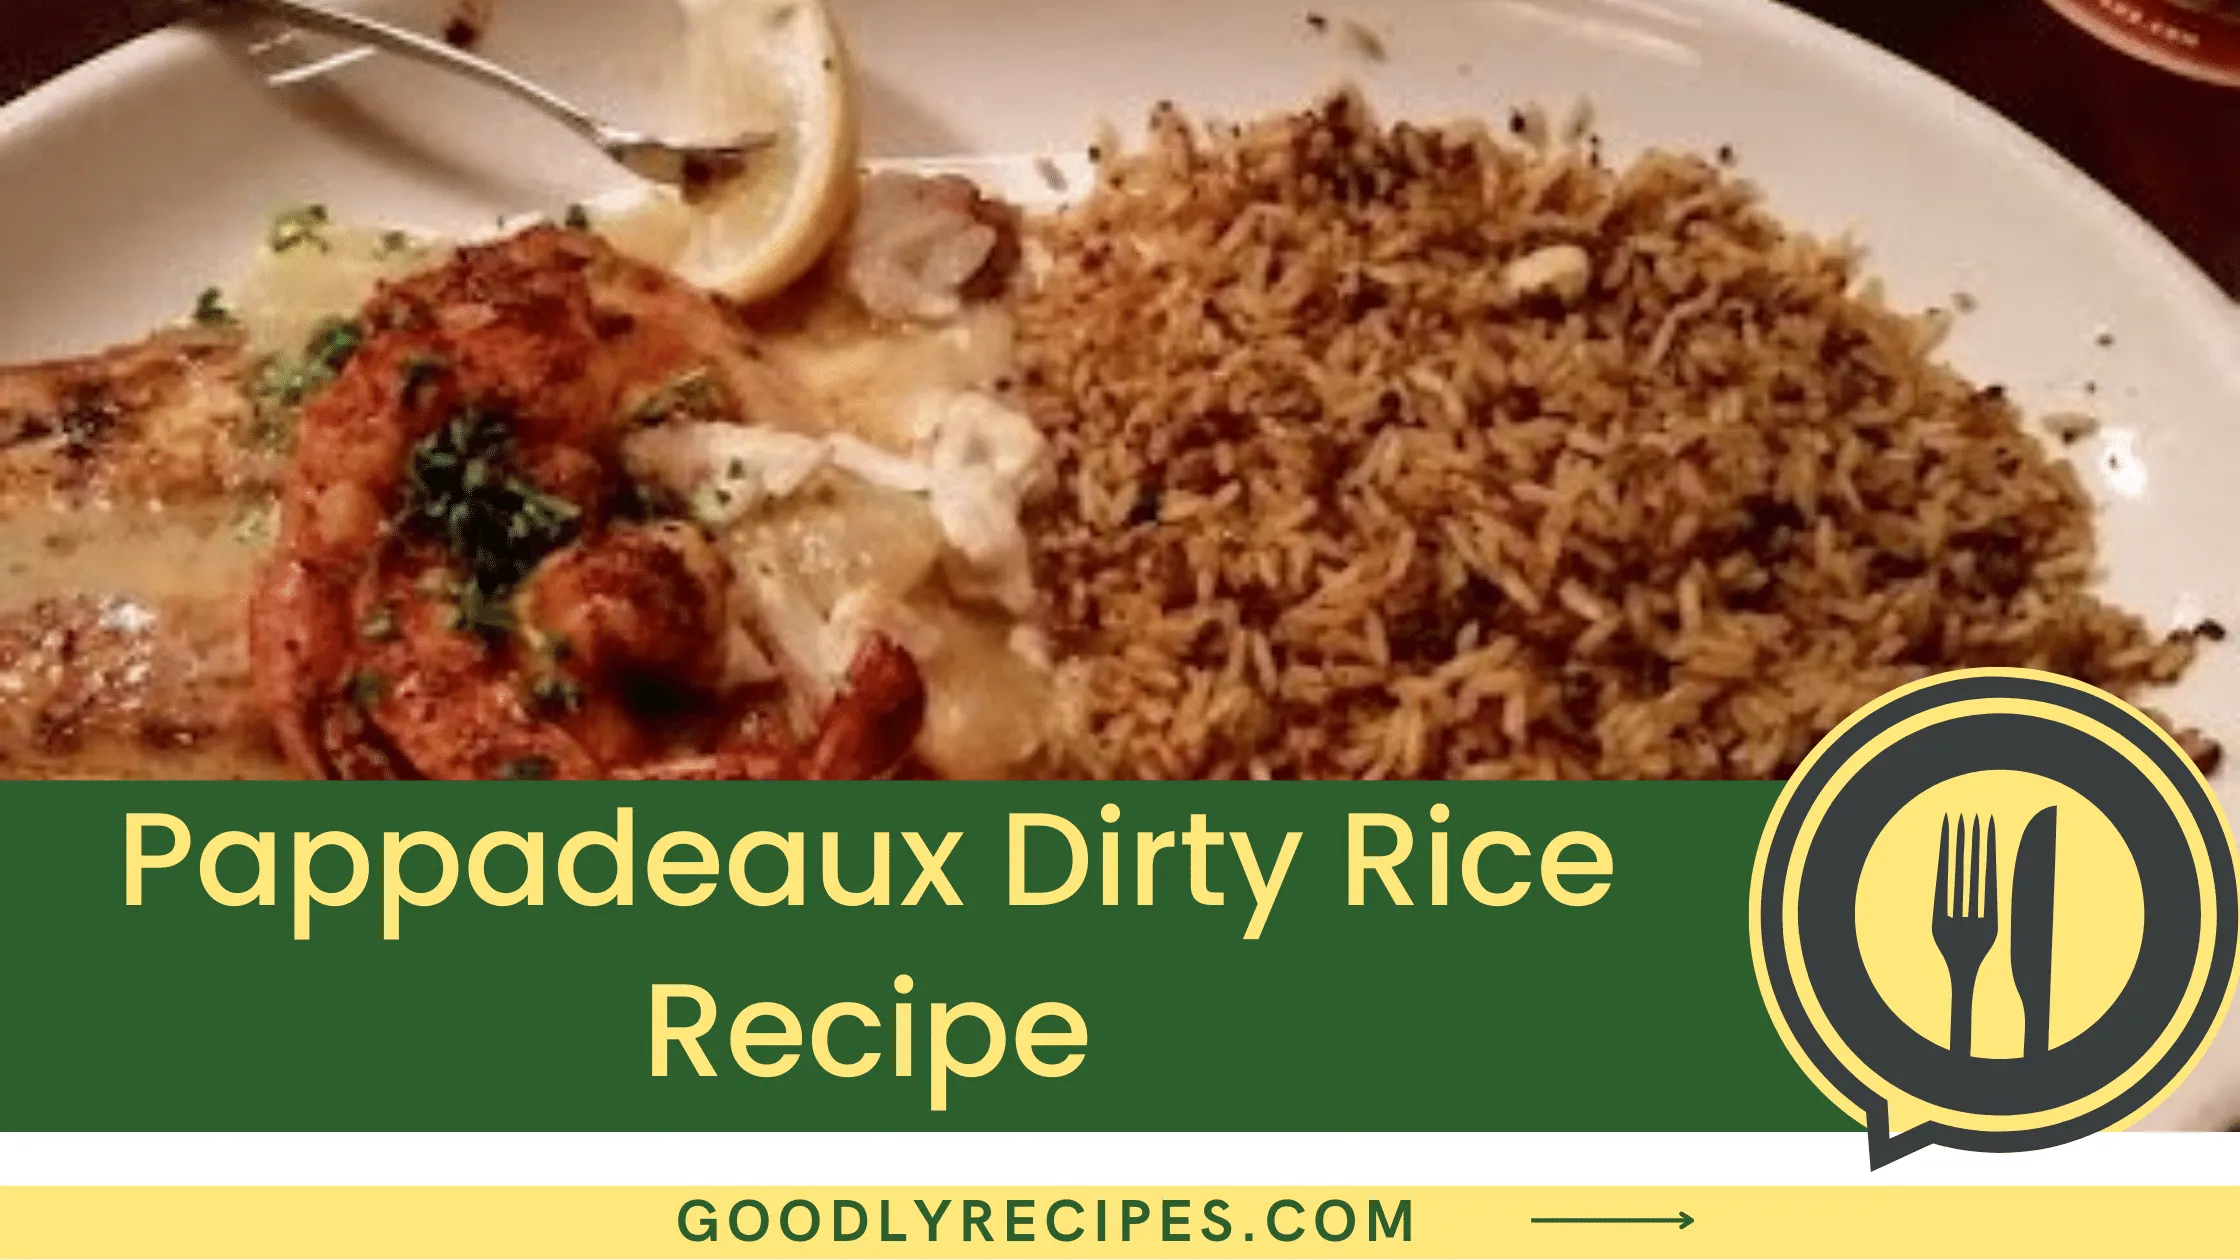 Pappadeaux Dirty Rice Recipe - For Food Lovers